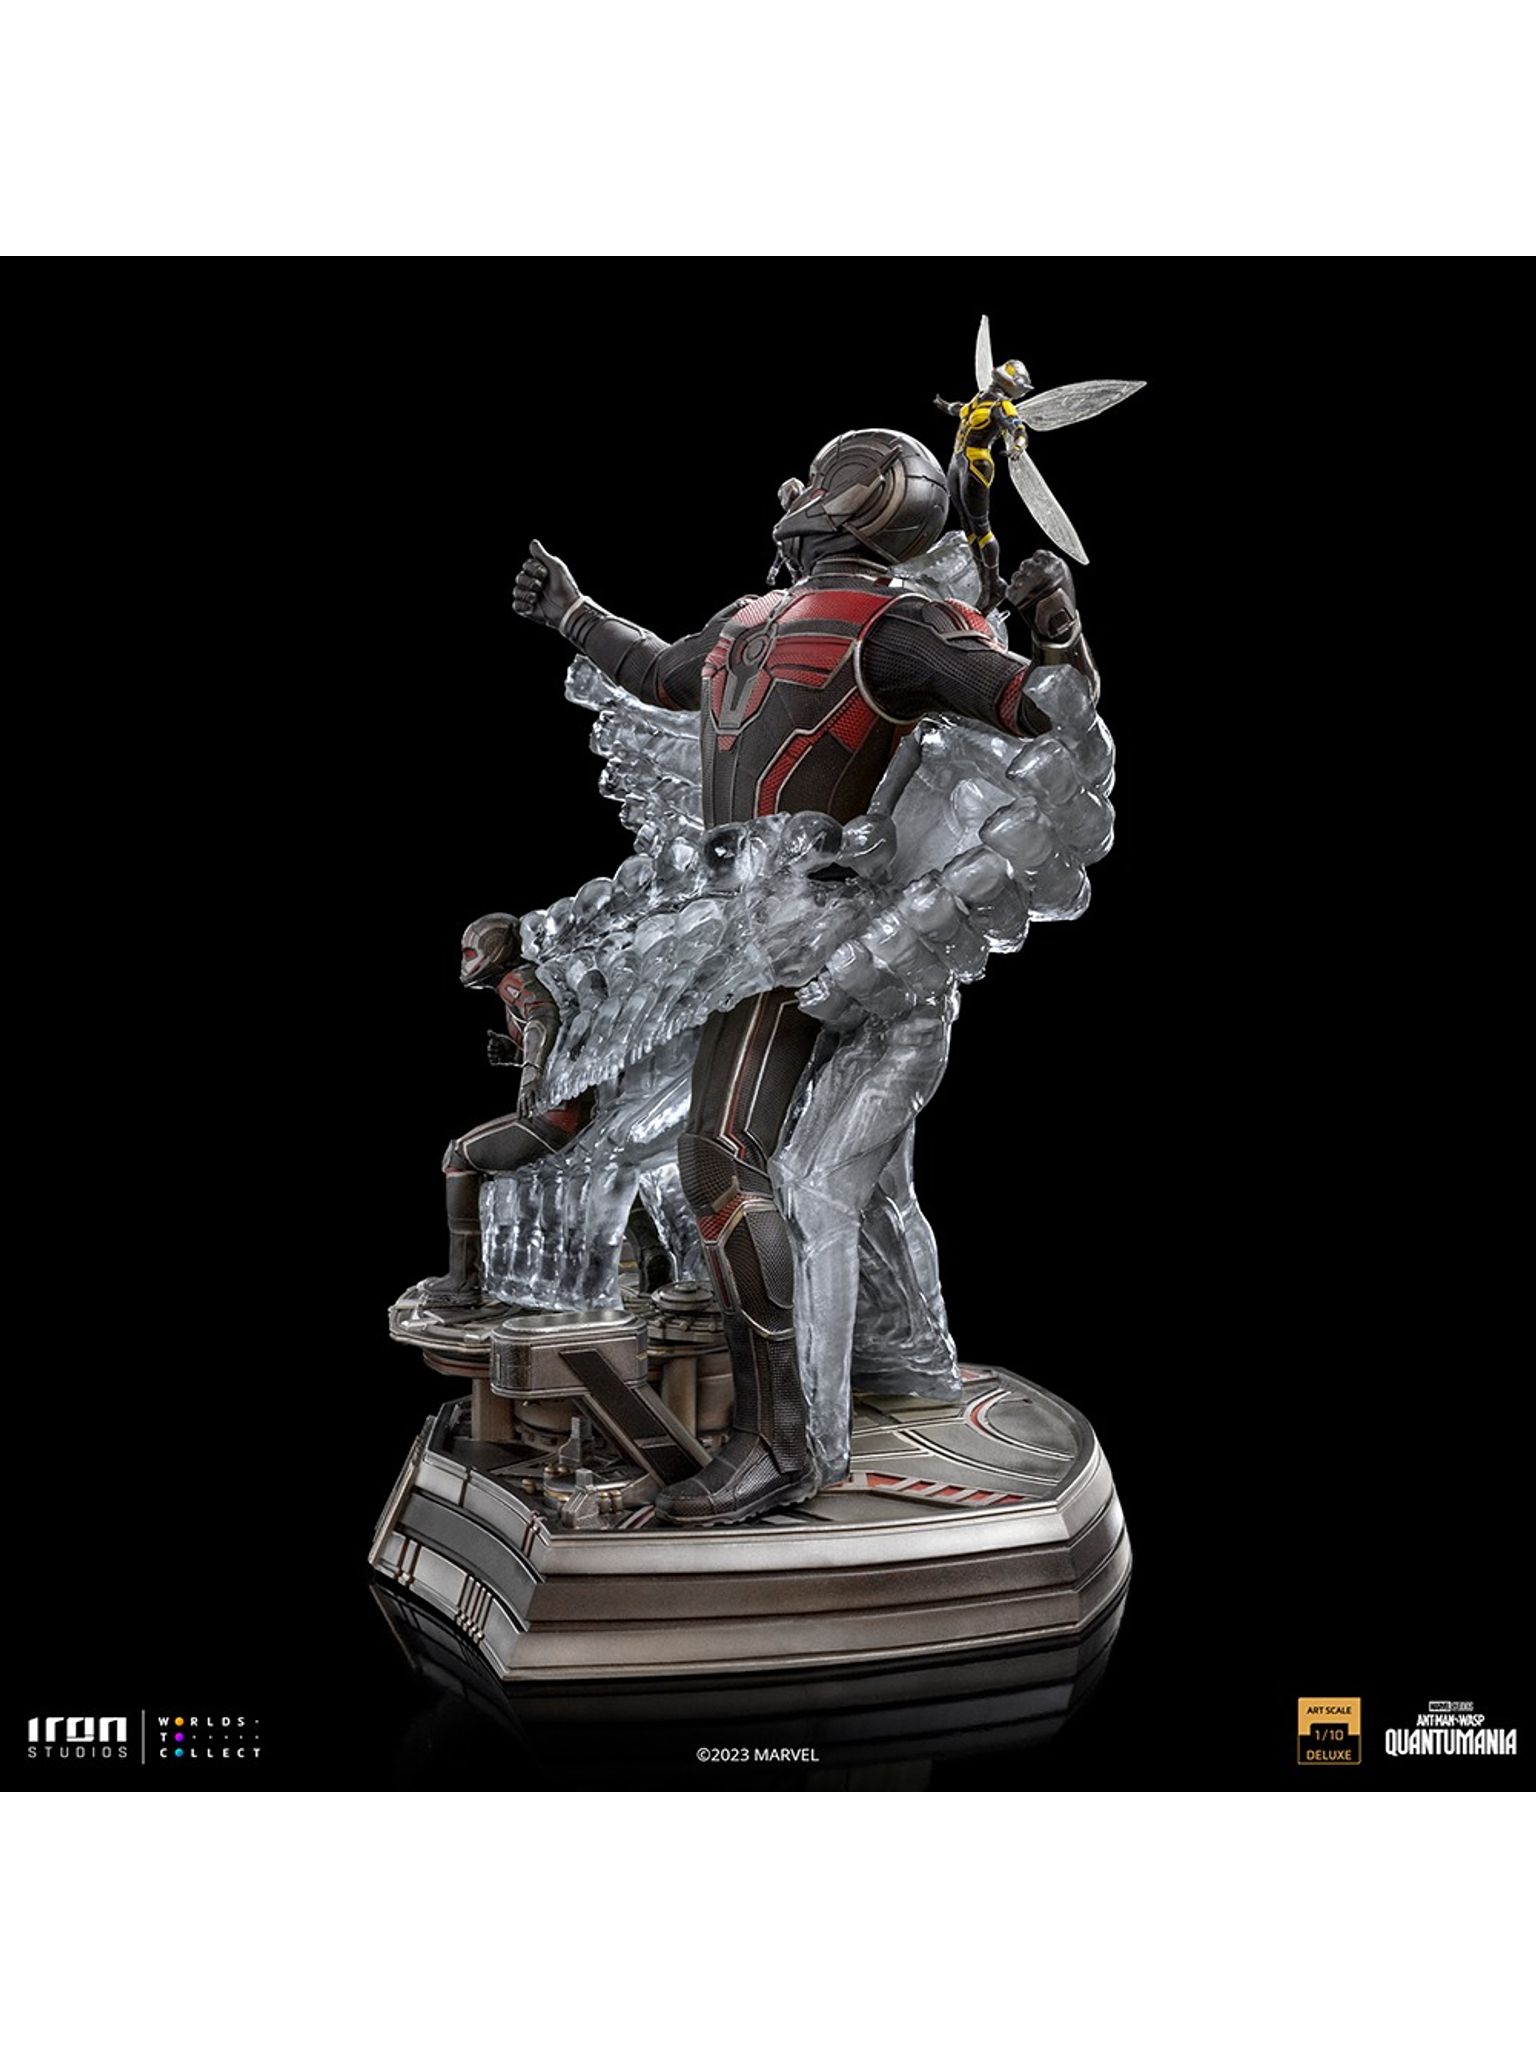 IRON STUDIOS : Ant-Man and the Wasp Quantumania - Statue Ant-Man and the Wasp - Art Scale 1/10 207881-1536-2048?v=638170908168600000&width=1536&height=2048&aspect=true